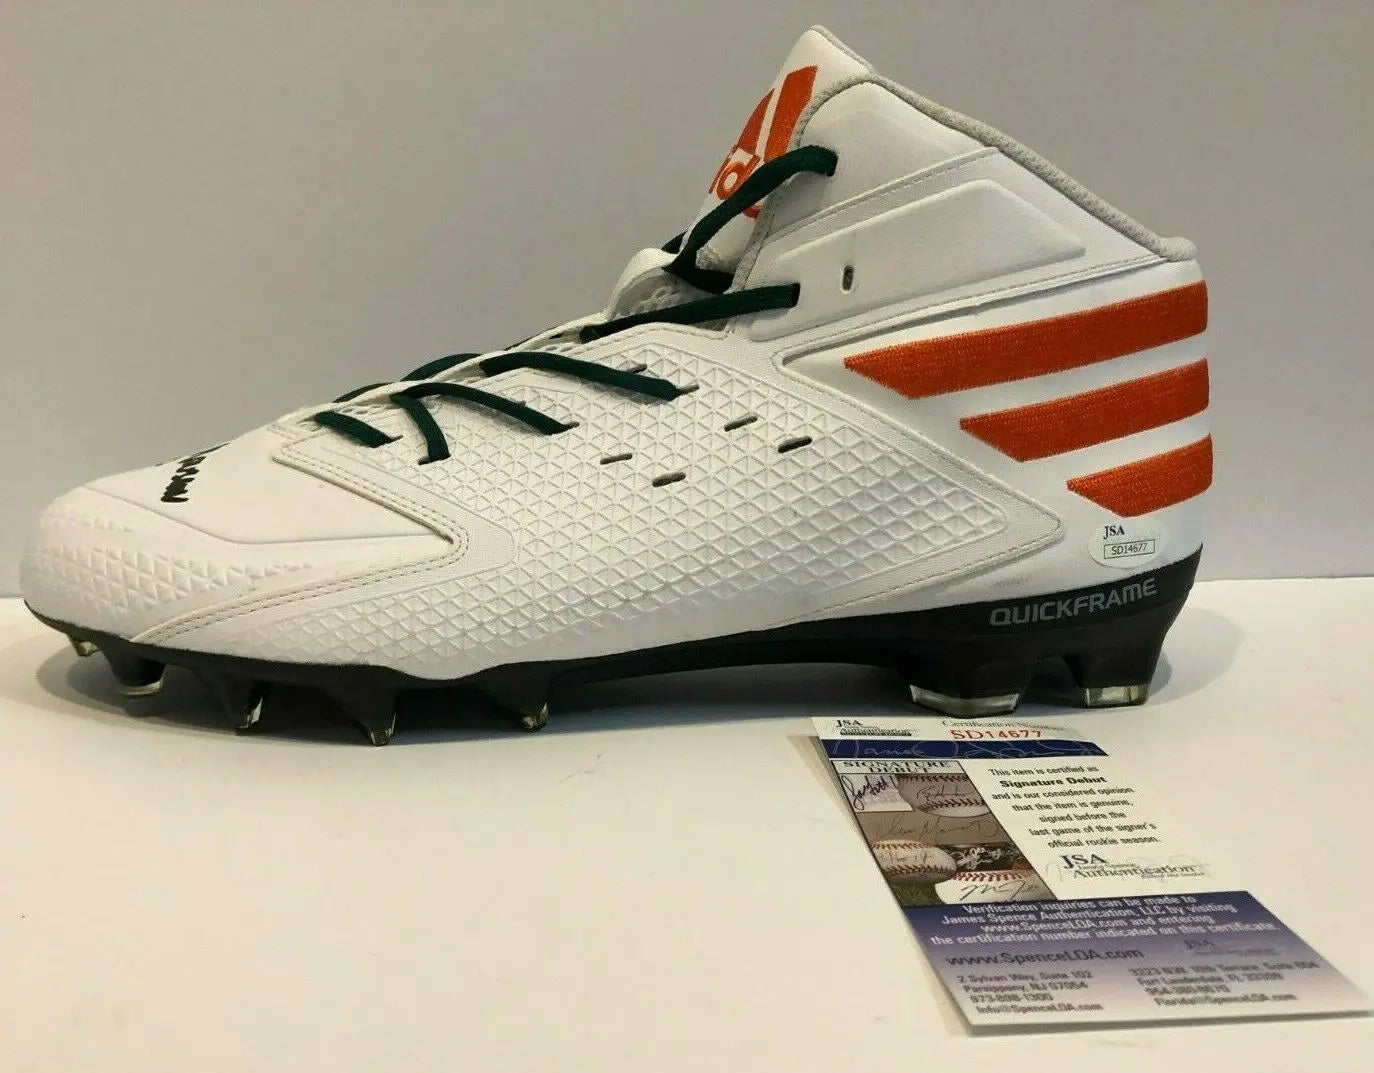 MVP Authentics Miami Hurricanes Greg Rousseau Autographed Signed Adidas Cleat Jsa Coa 134.10 sports jersey framing , jersey framing